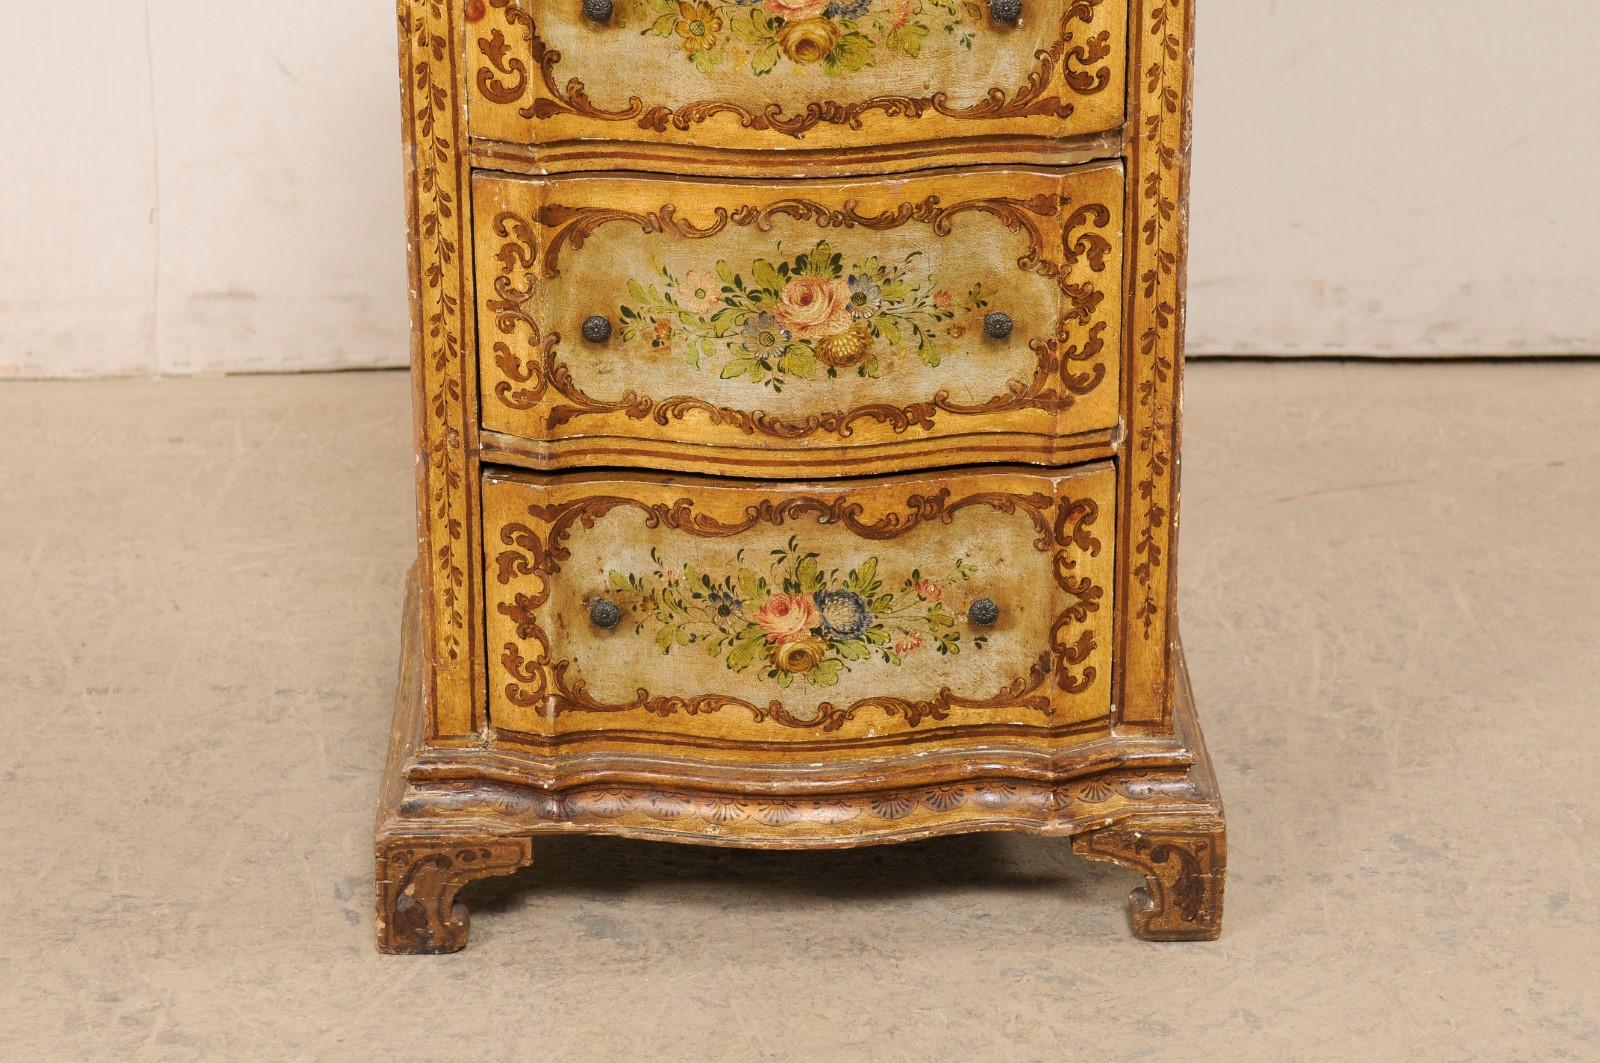 19th Century Italian 19th C. Petite Serpentine Chest with Hand-Painted Floral Embellishments For Sale